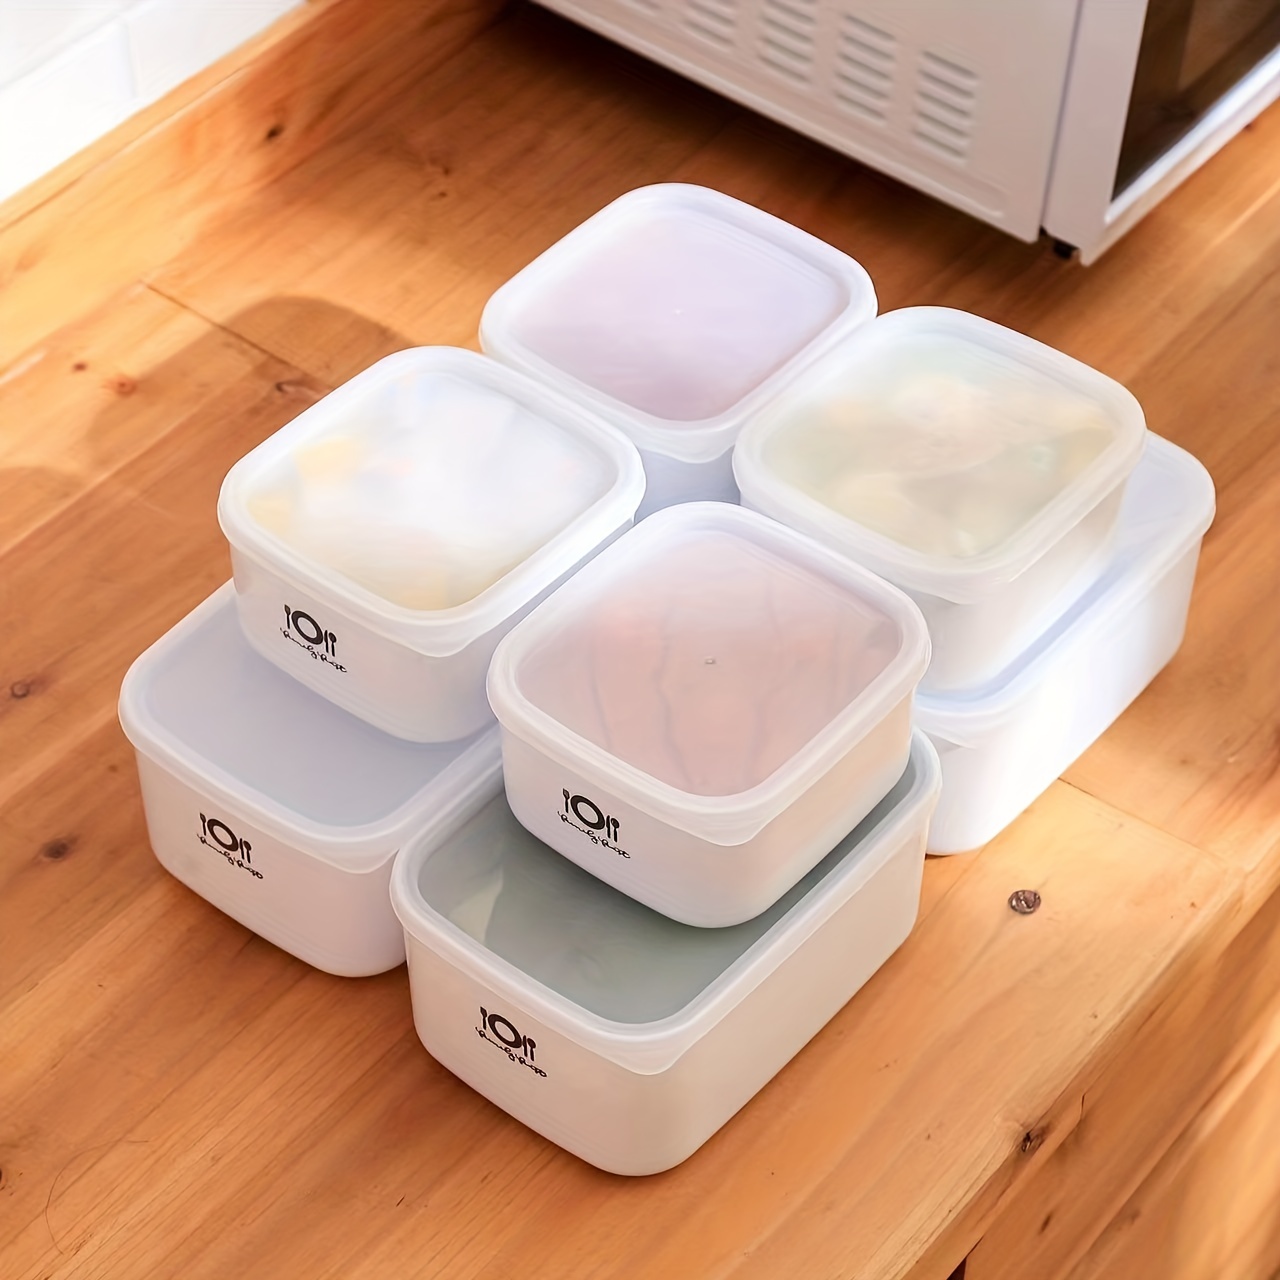 1pc Refrigerator Storage Box With Flip Lid And Multiple Compartments For  Storing And Separating Ingredients, Single / Double Cover, Refrigerator  Fruit